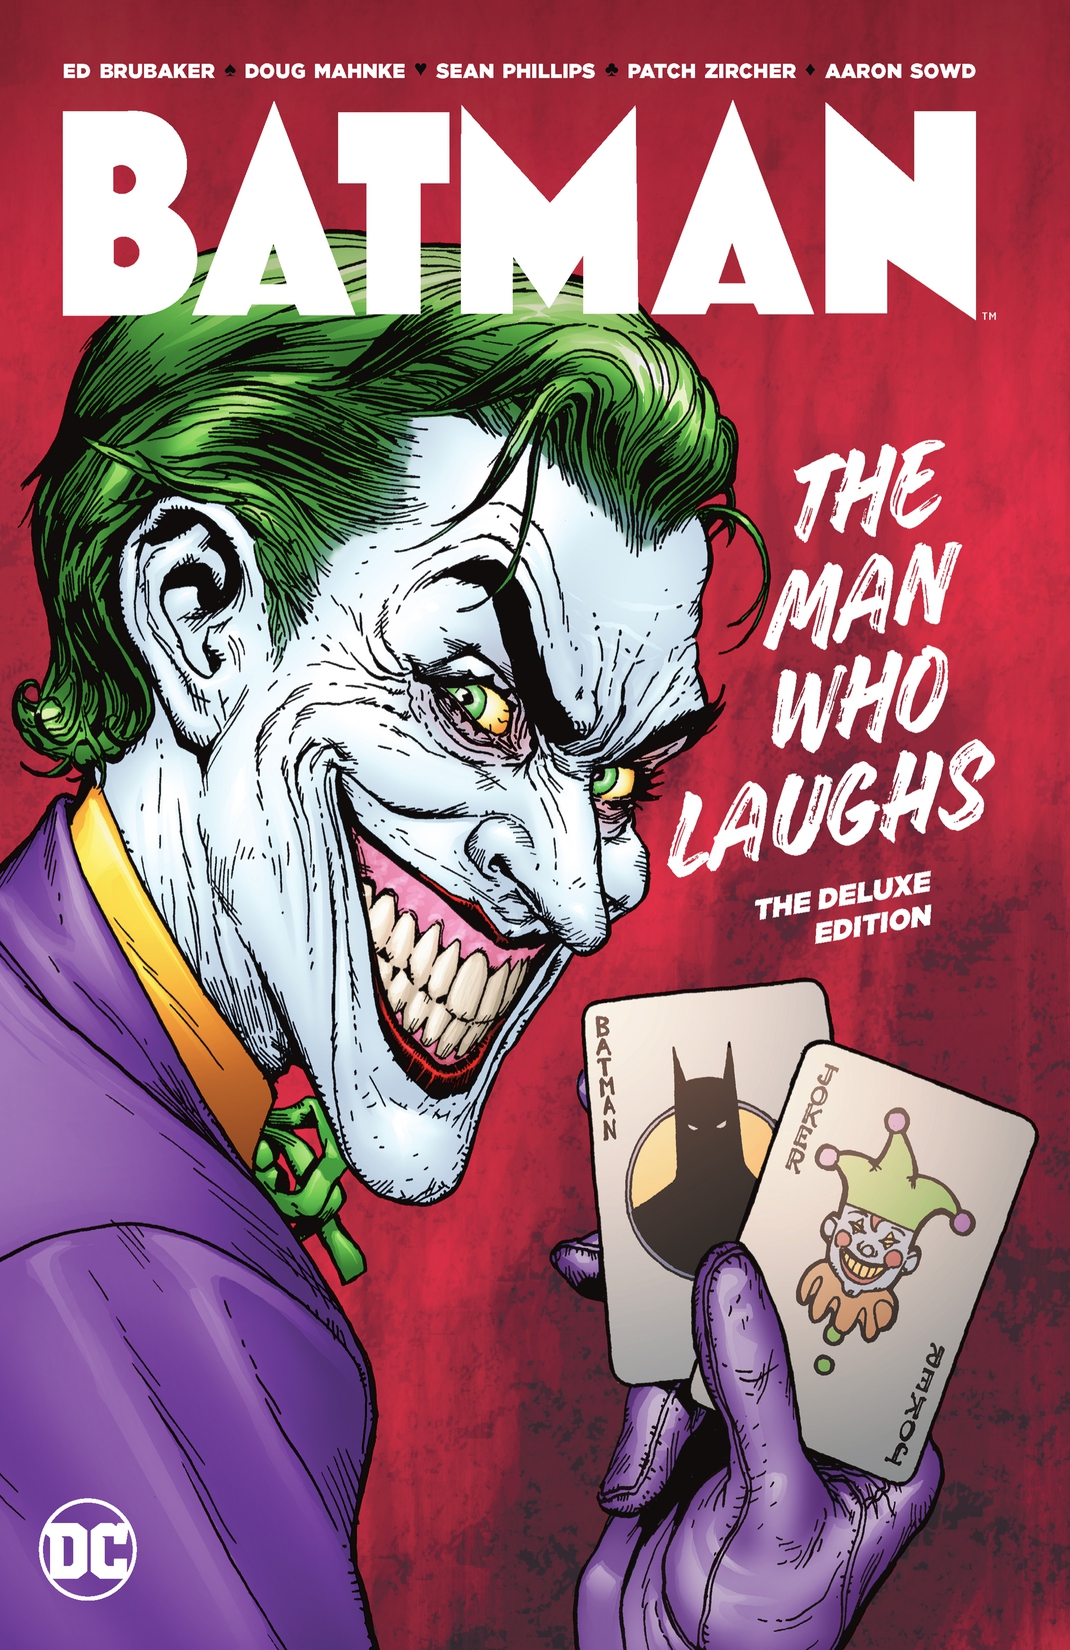 Batman: The Man Who Laughs: The Deluxe Edition preview images